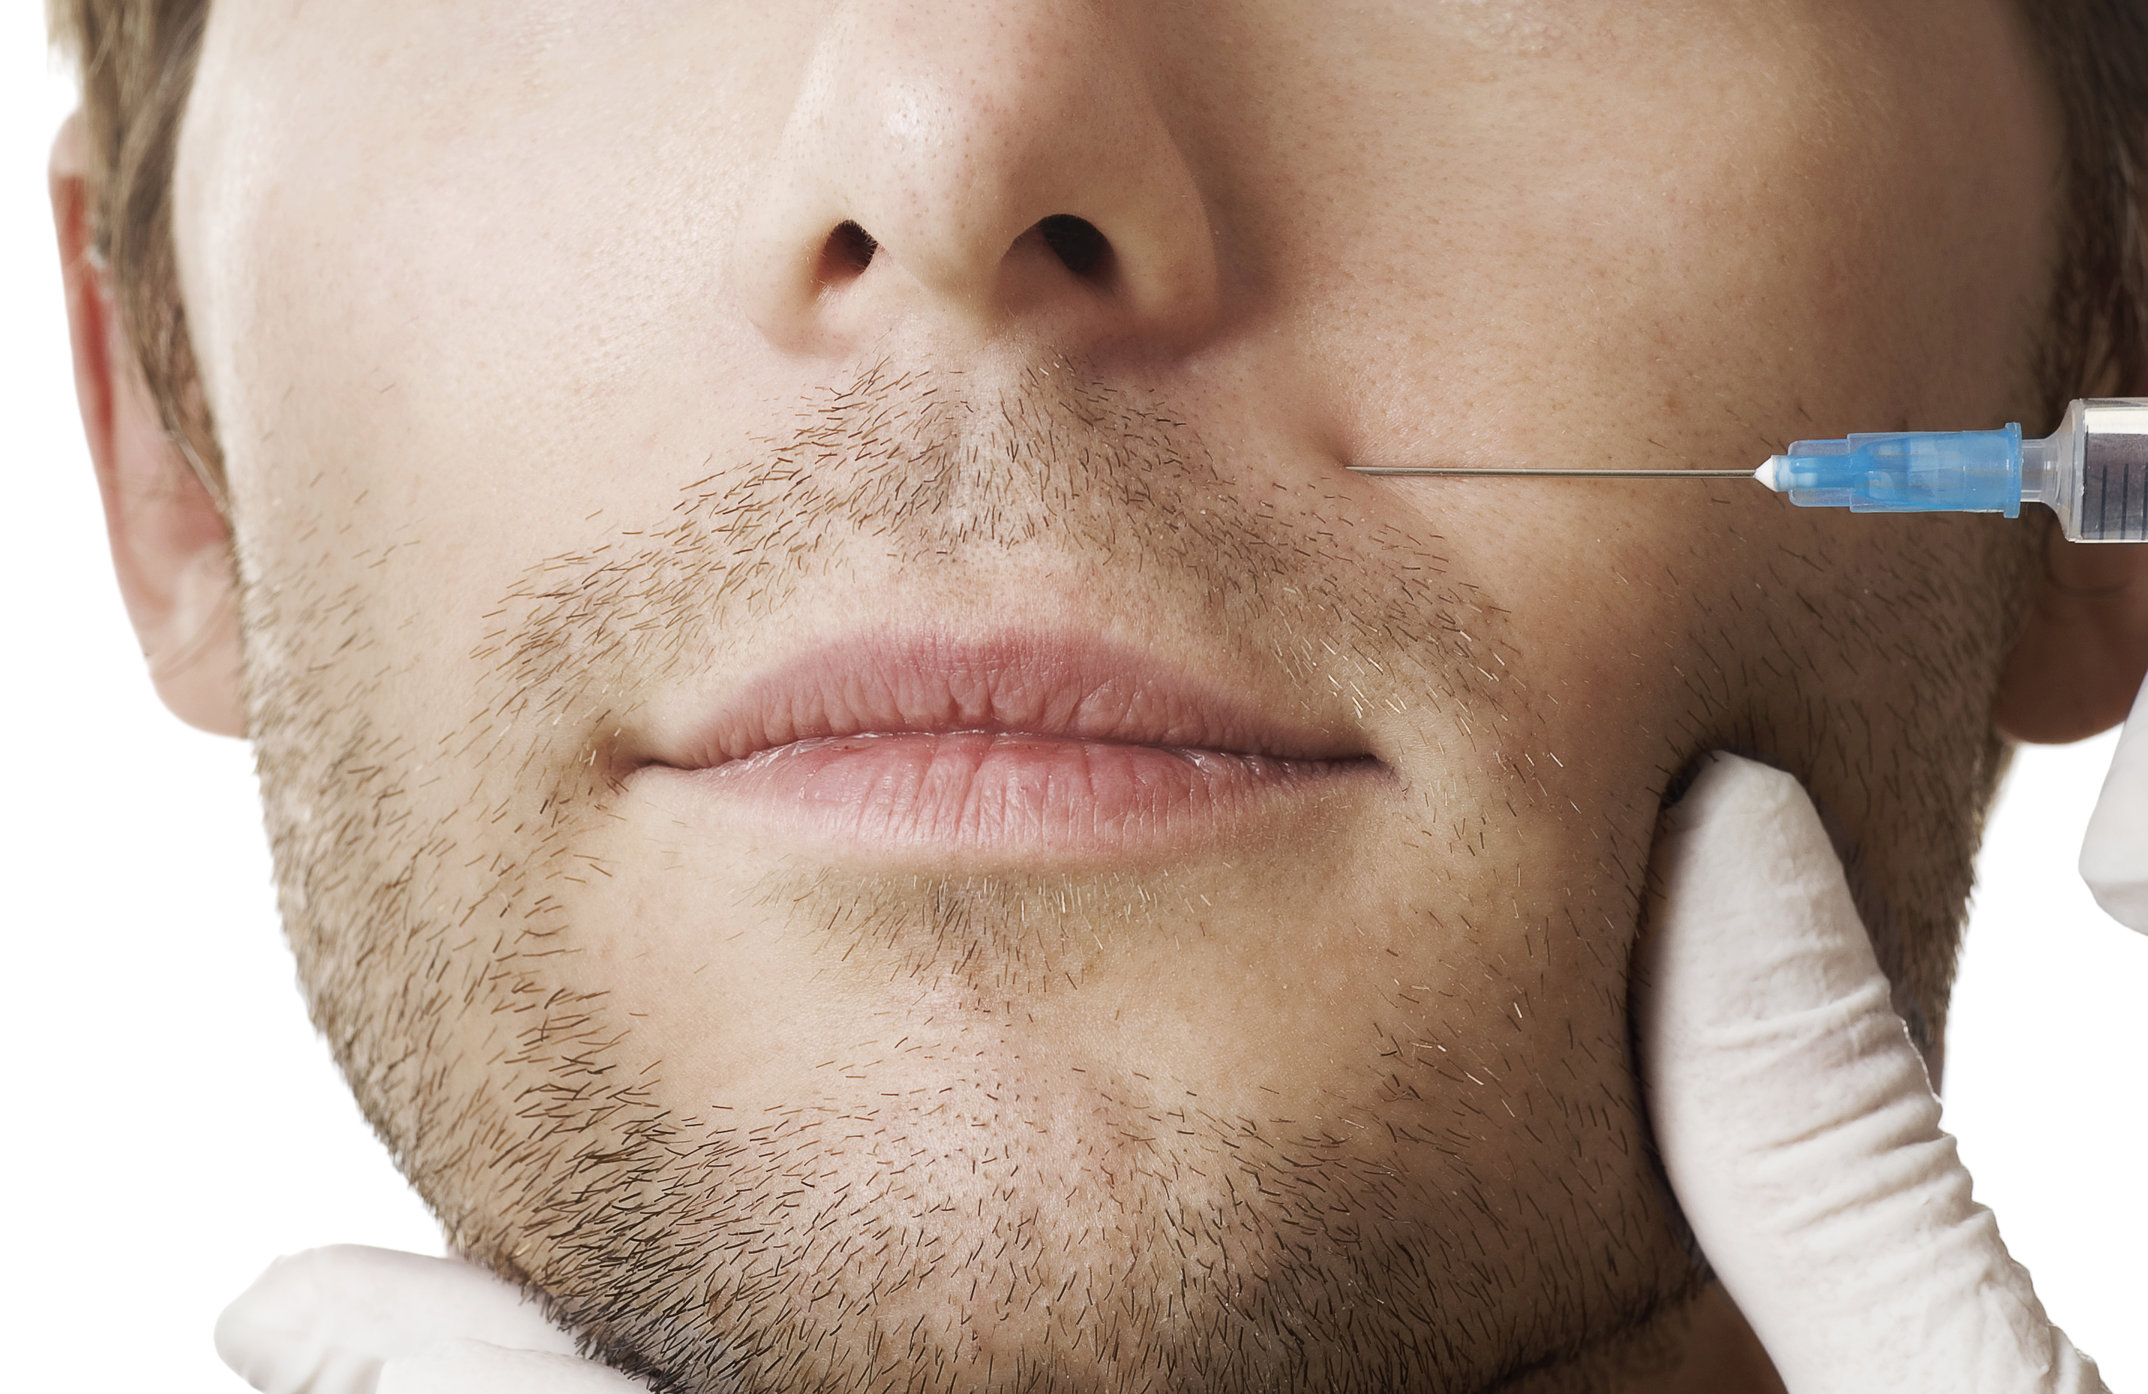 Botox and Dermal Fillers Done by Dentists, Is It Right or Wrong?